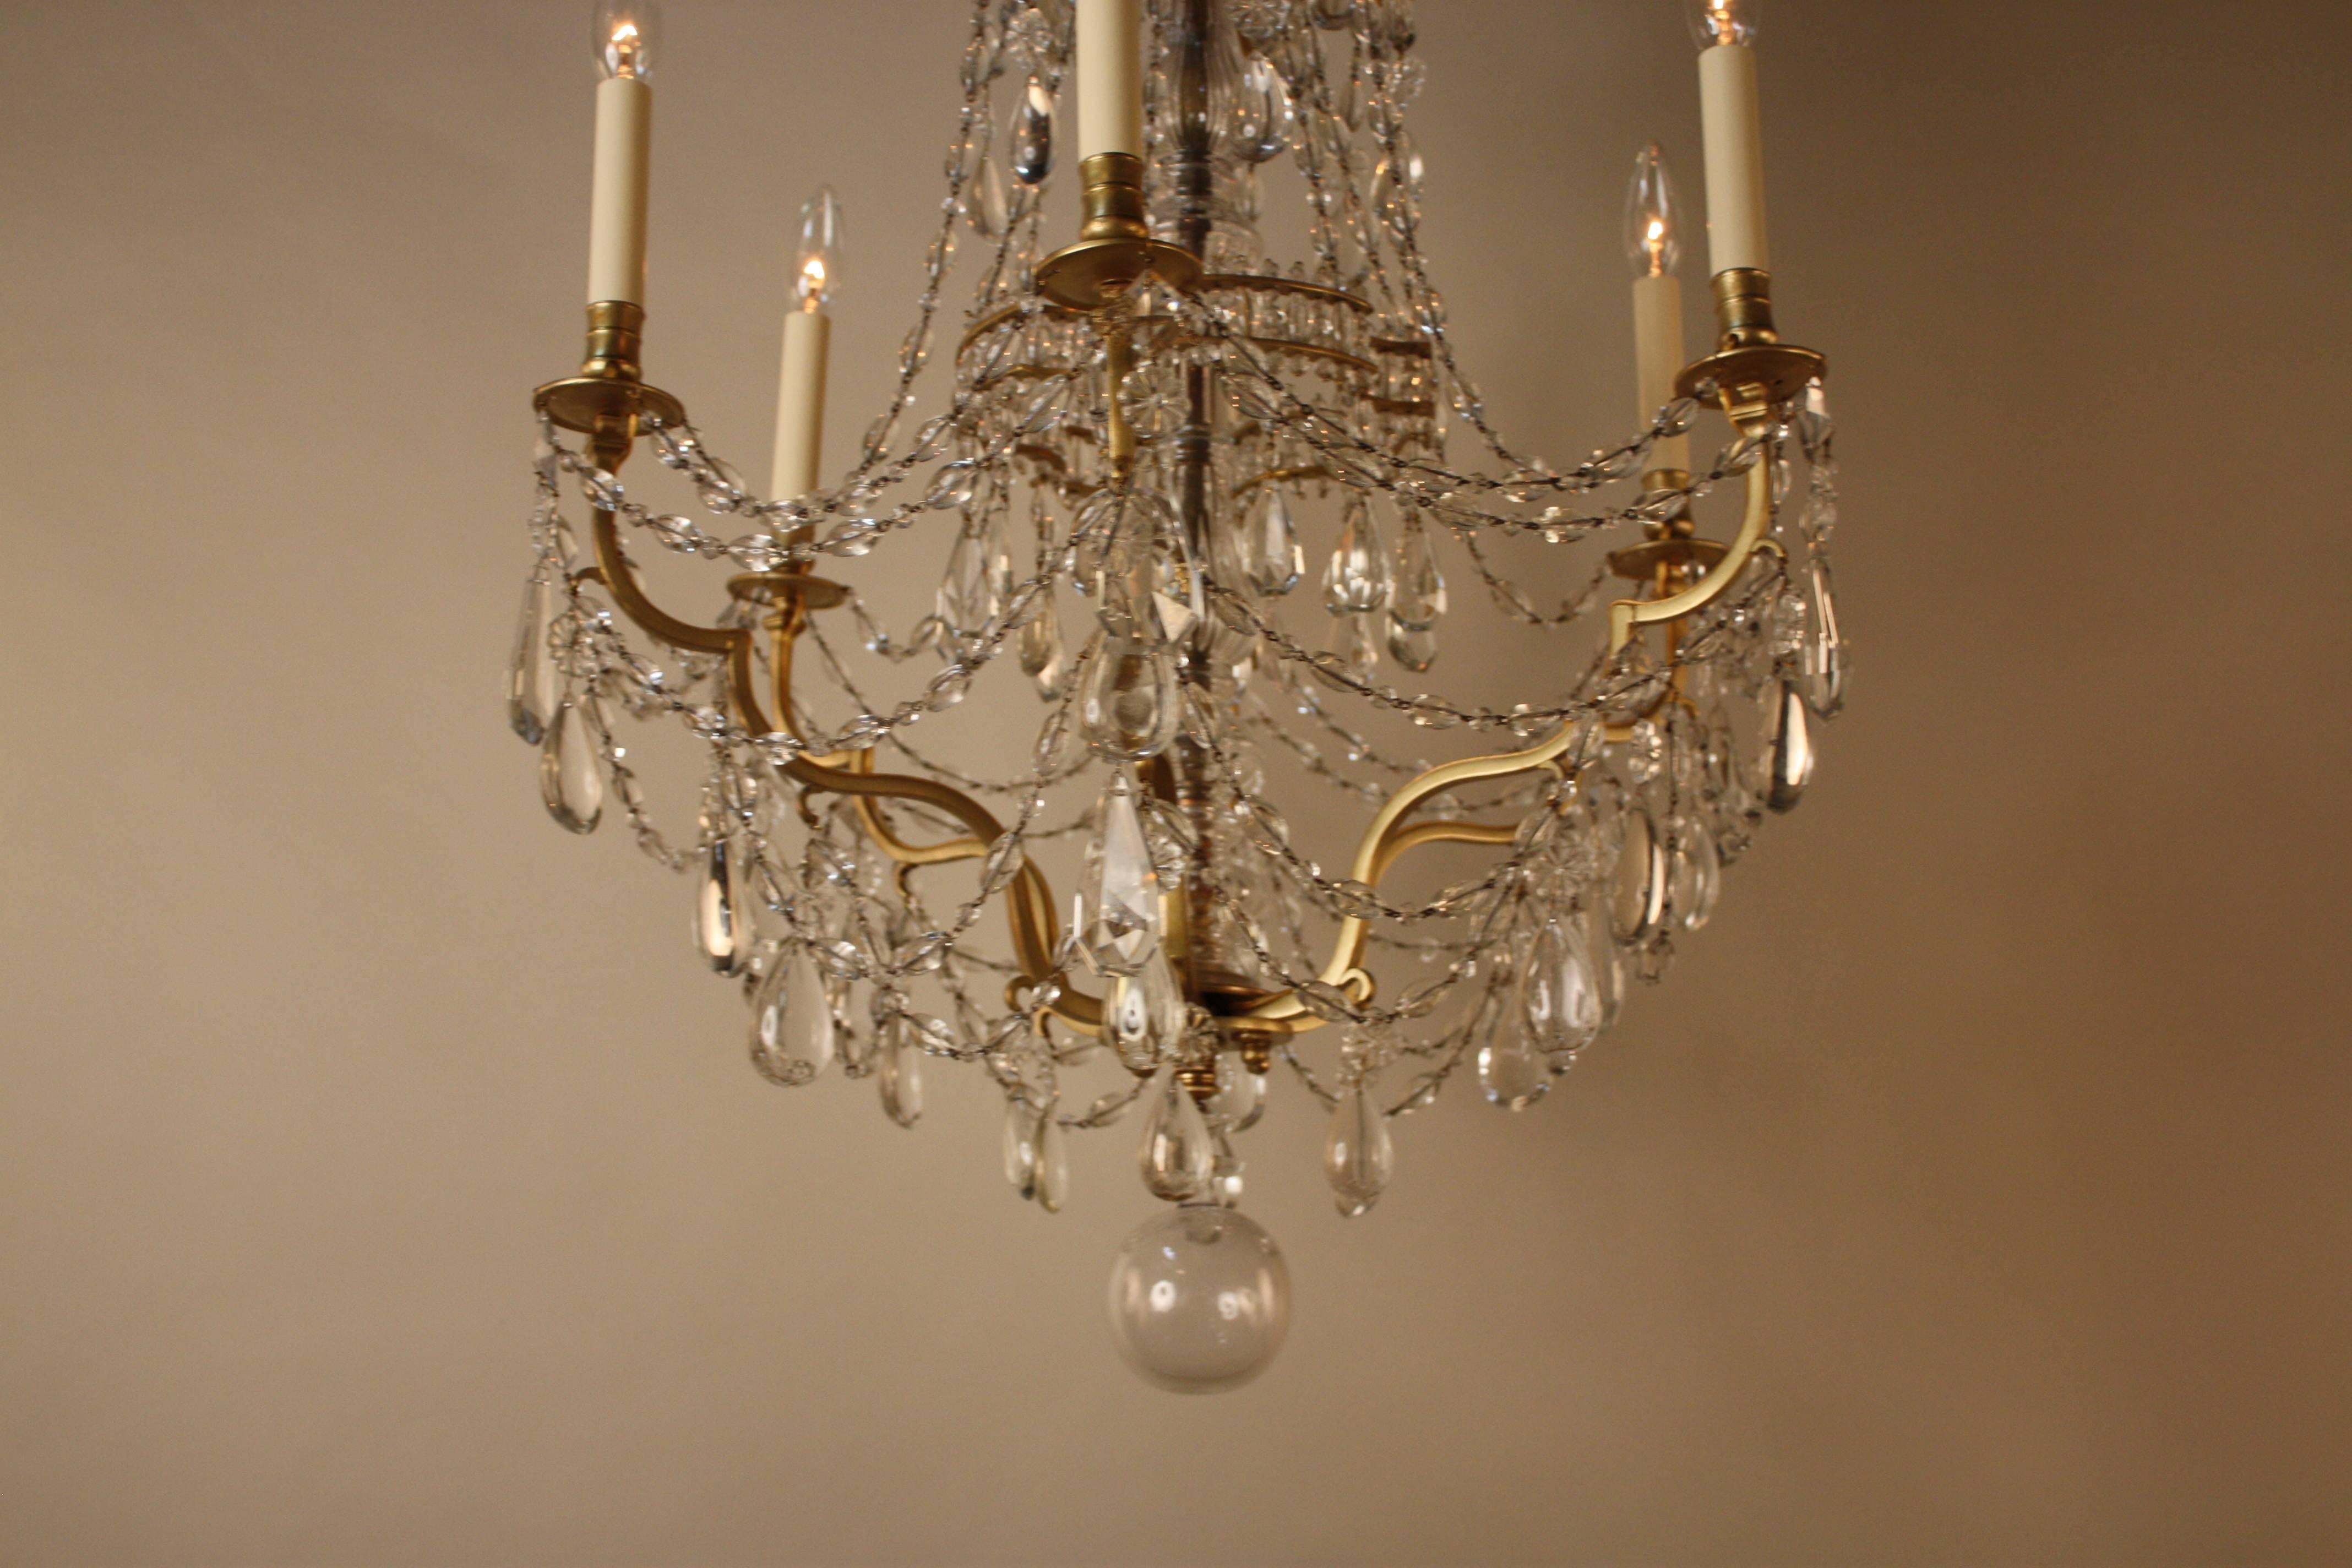 Elegant six-arm chandelier with hand polished olive shape crystal and beautiful design bronze frame work. This chandelier was made in France, early 20th century.
23